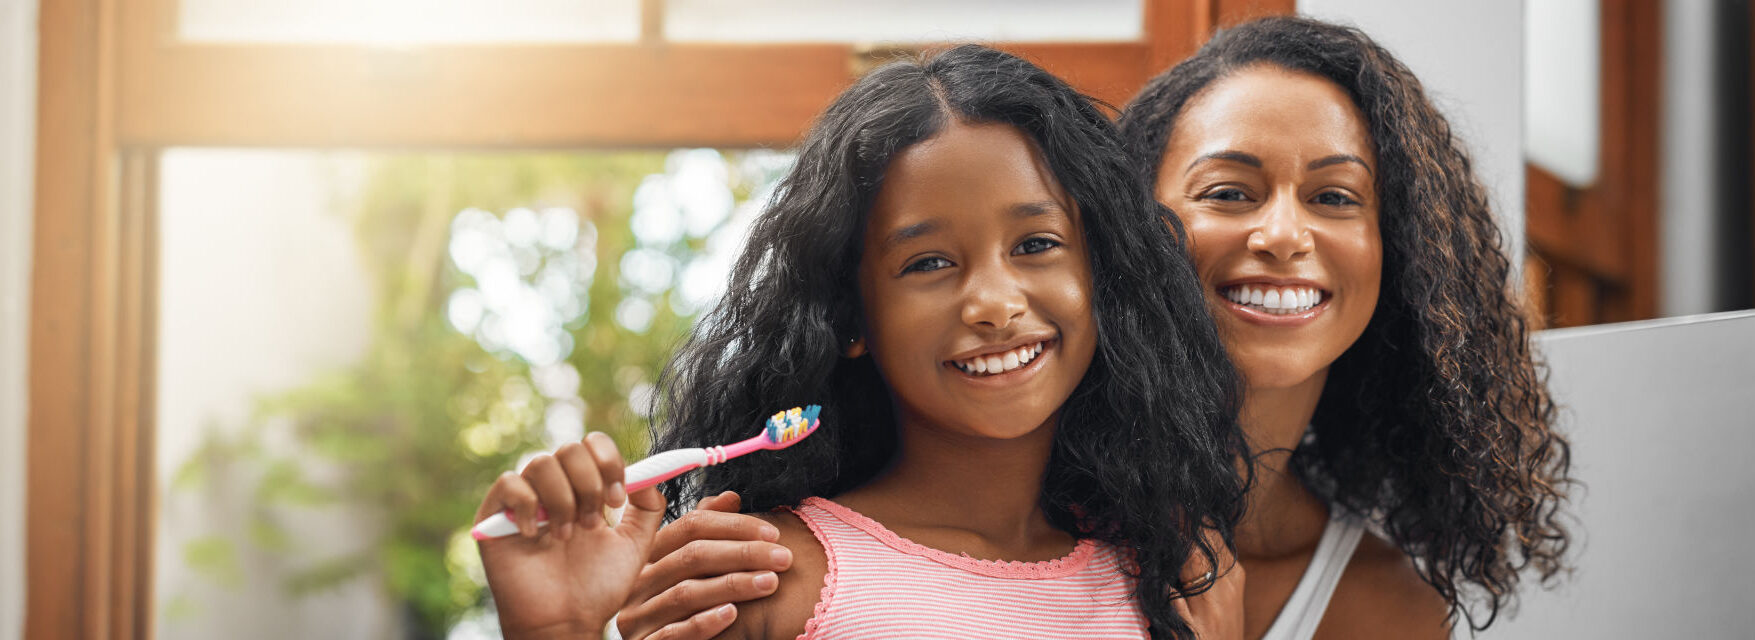 Cropped portrait of an attractive young woman and her daughter brushing their teeth in the bathroom at home.